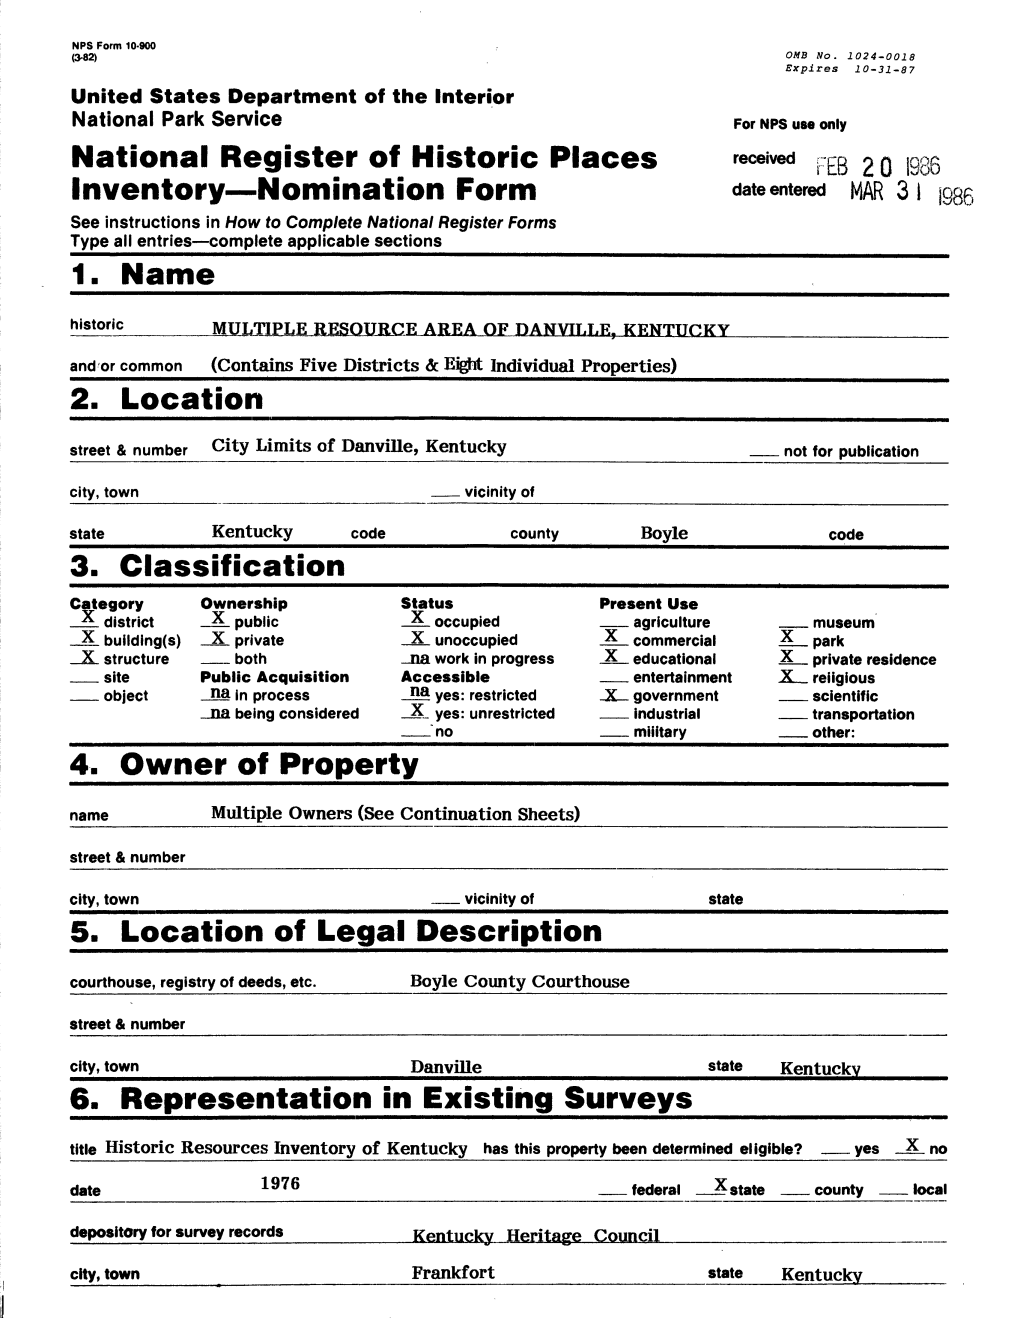 National Register of Historic Places Inventory Nomination Form 1. Name 2. Location 6. Representation in Existing Surveys___